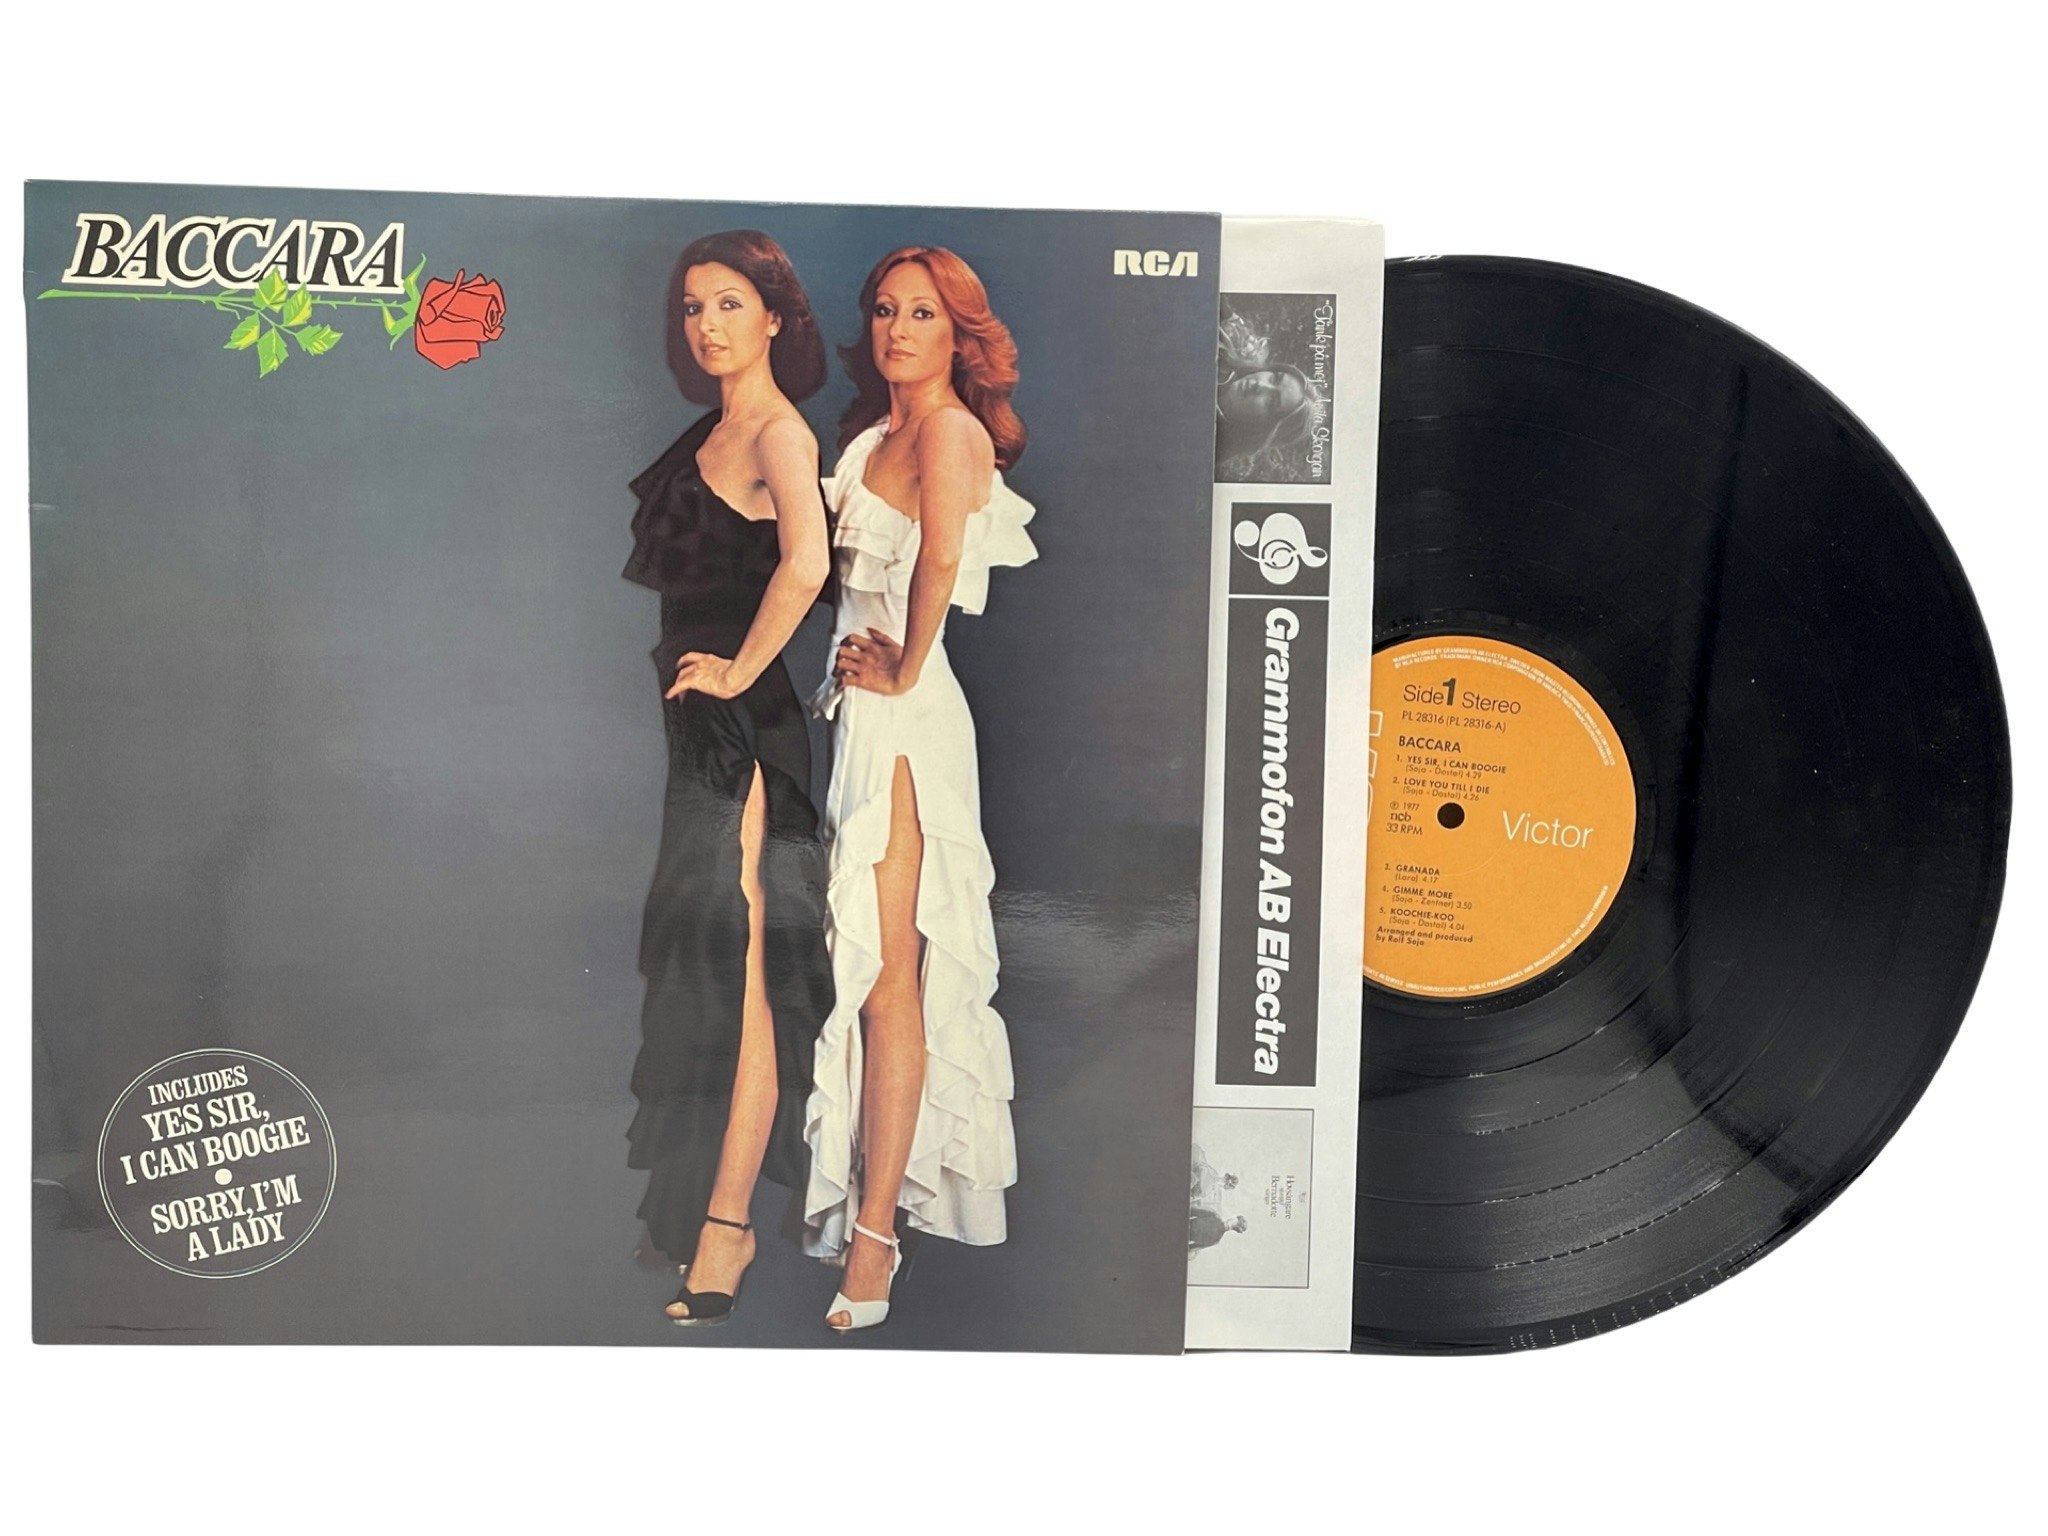 Baccara Includes Yes Sir I Can Boogie Sorry Im A Lady Vinyl LP